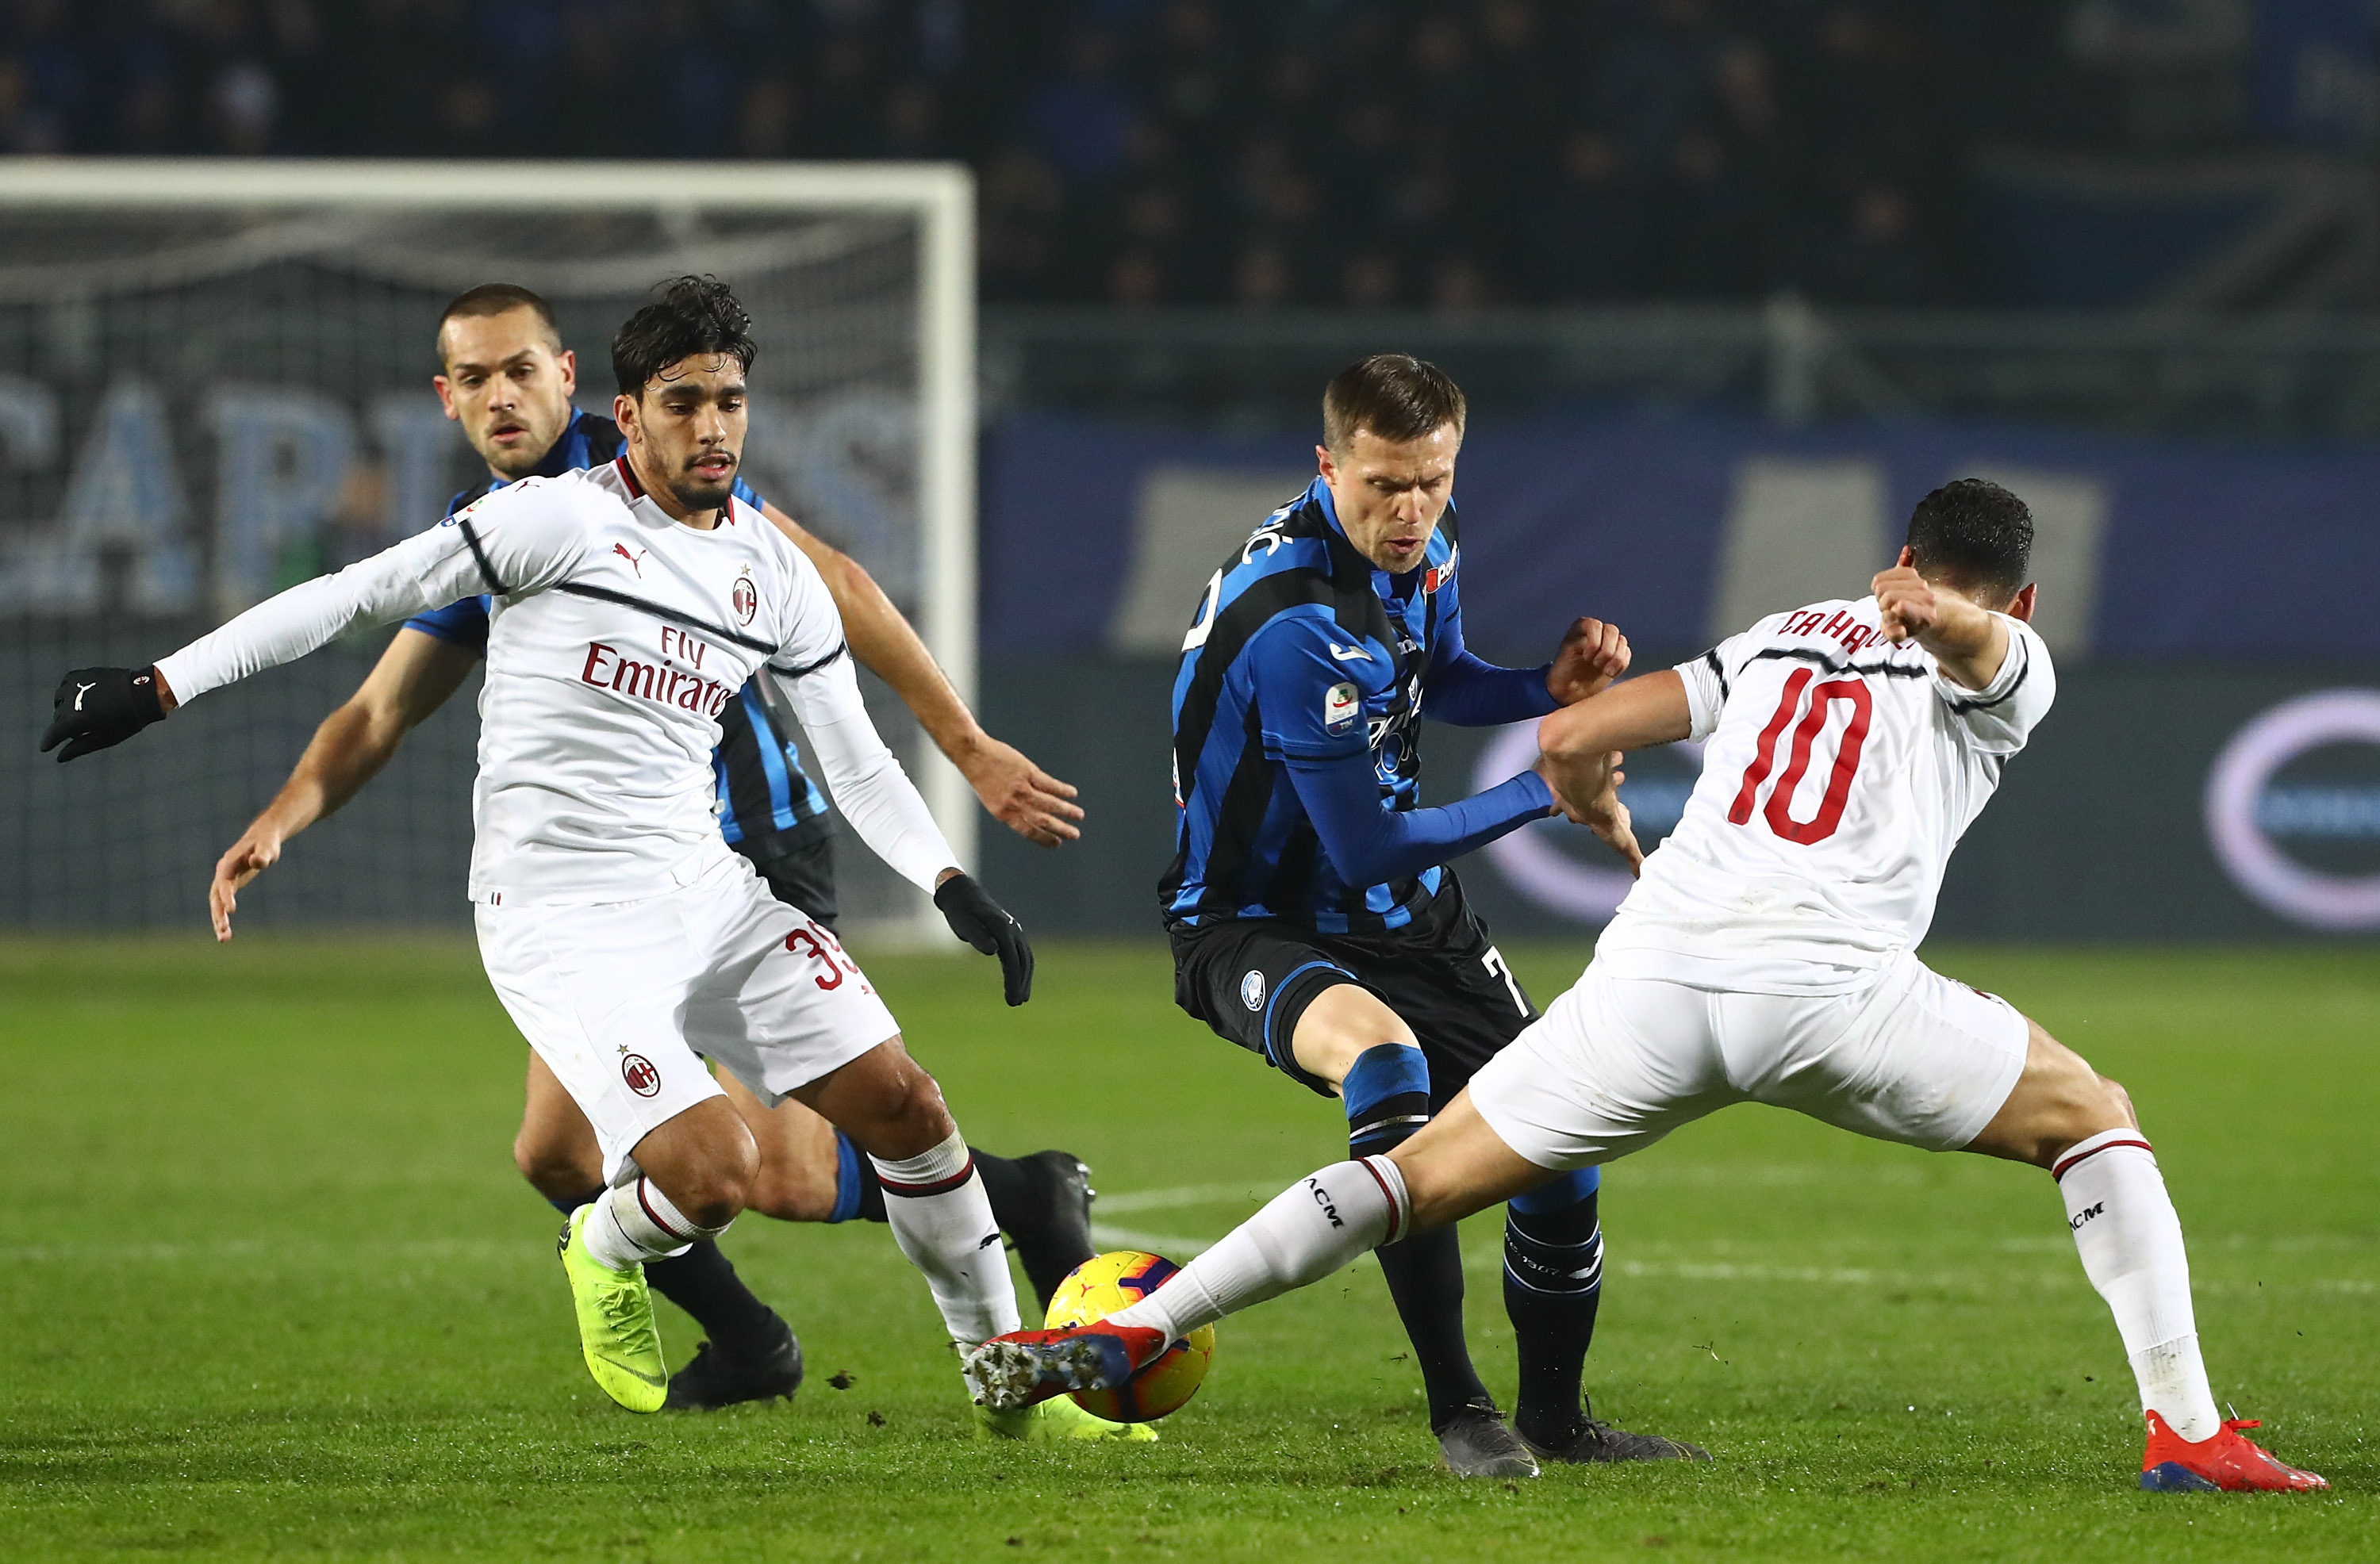 BERGAMO, ITALY - FEBRUARY 16: Josip Ilicic (C) of Atalanta BC competes for the ball with Hakan Calhanoglu (R) and Lucas Paqueta of AC Milan during the Serie A match between Atalanta BC and AC Milan at Stadio Atleti Azzurri d'Italia on February 16, 2019 in Bergamo, Italy. (Photo by Marco Luzzani/Getty Images)